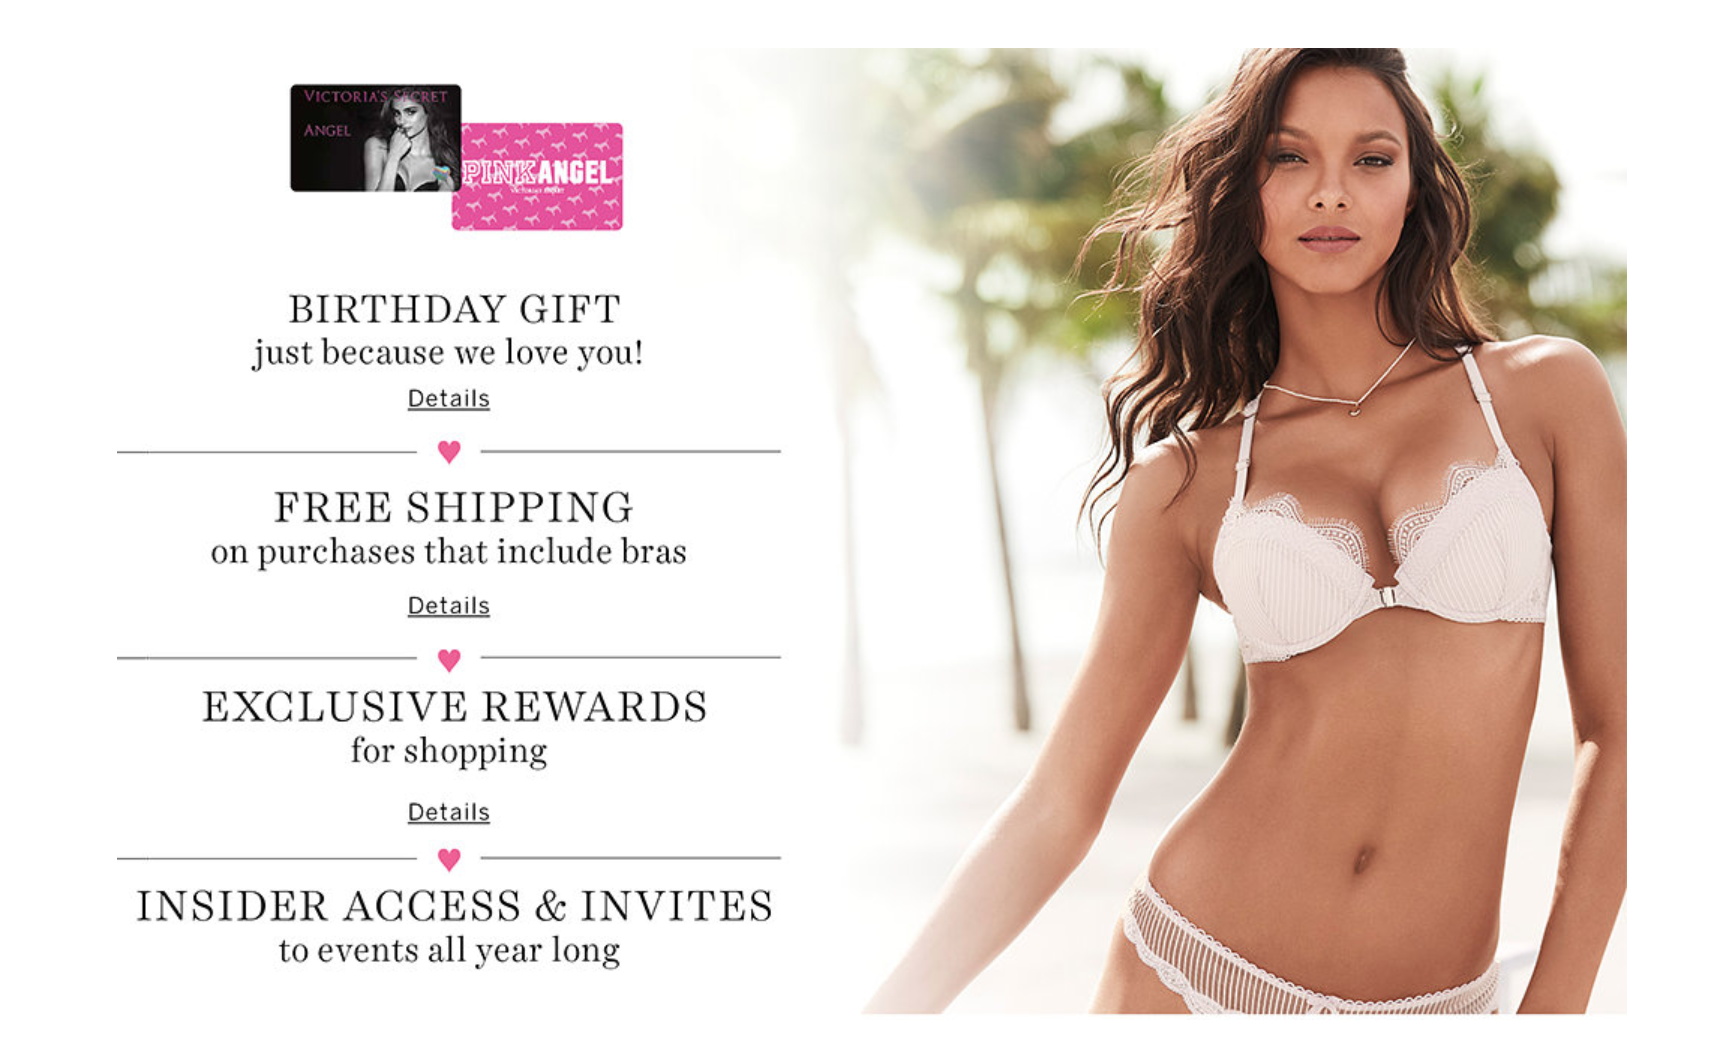 Victoria's Secret - Calling all Cardmembers! Today only: unlock exclusive  access to 8/$38 Panties when you shop with a Victoria's Secret Credit Card  at Victoria's Secret or PINK.* Use Code: VCPANTIES. Valid